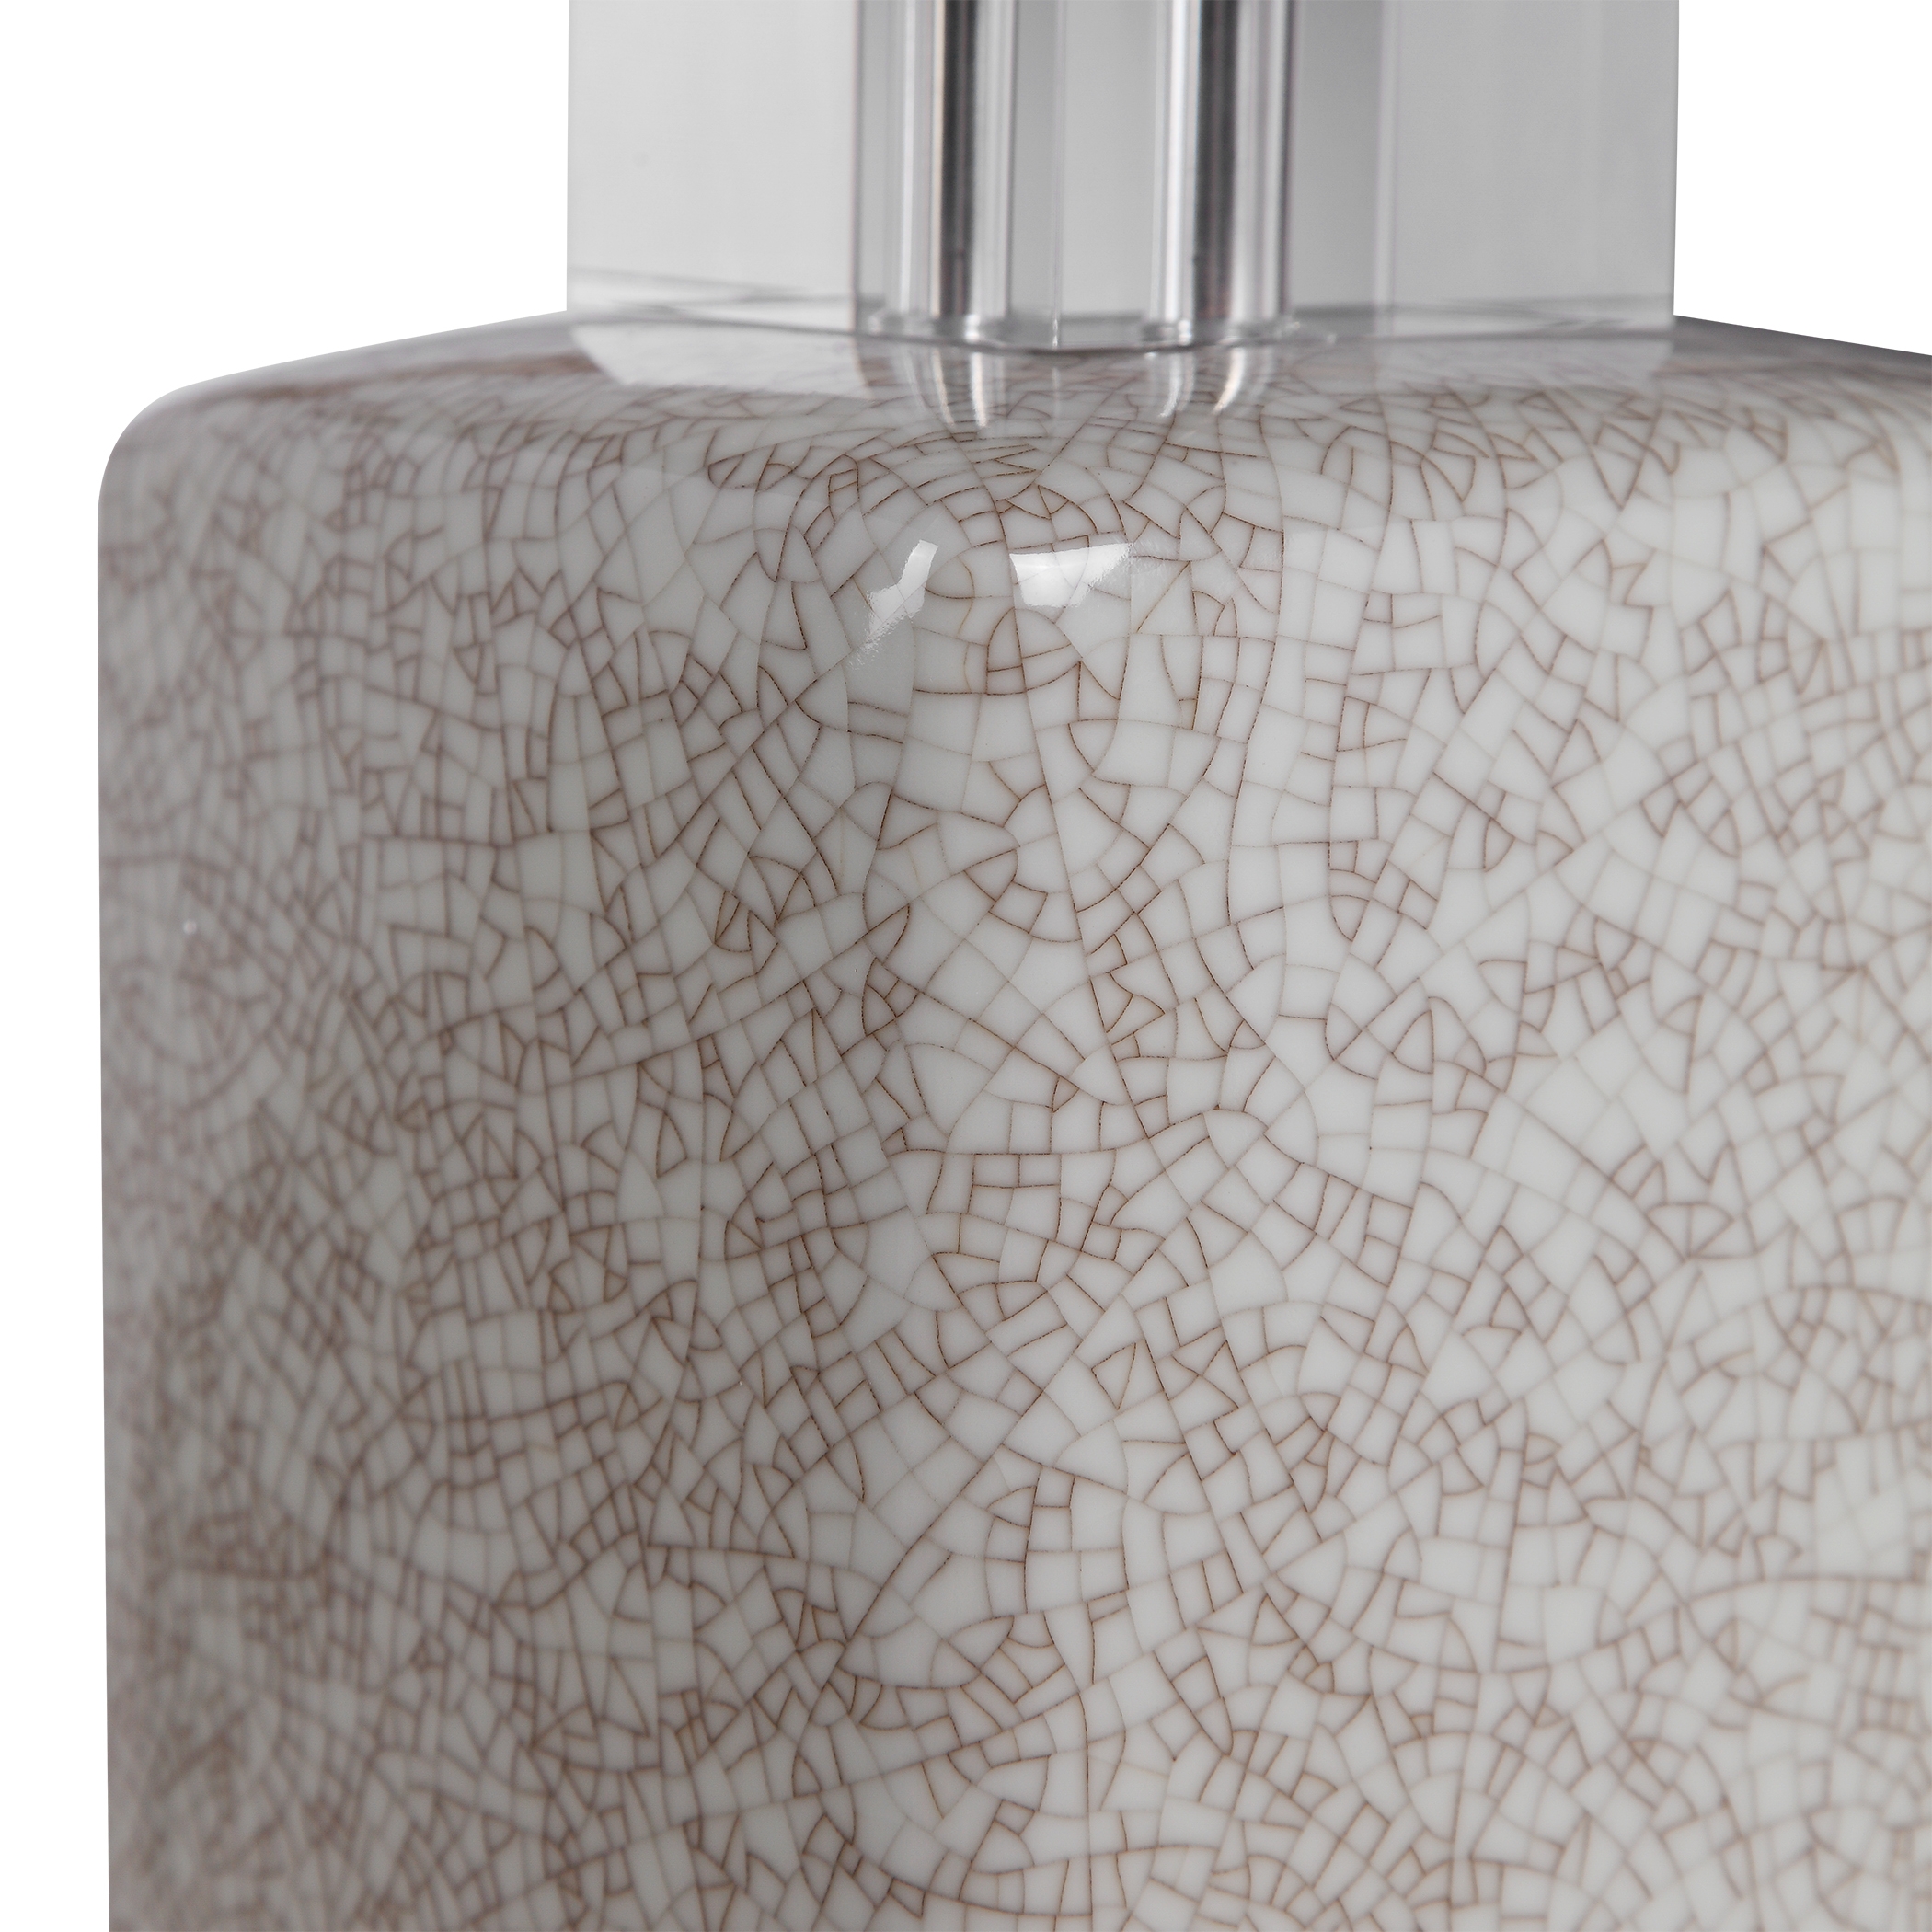 Irie Crackled Taupe Table Lamp - Image 3